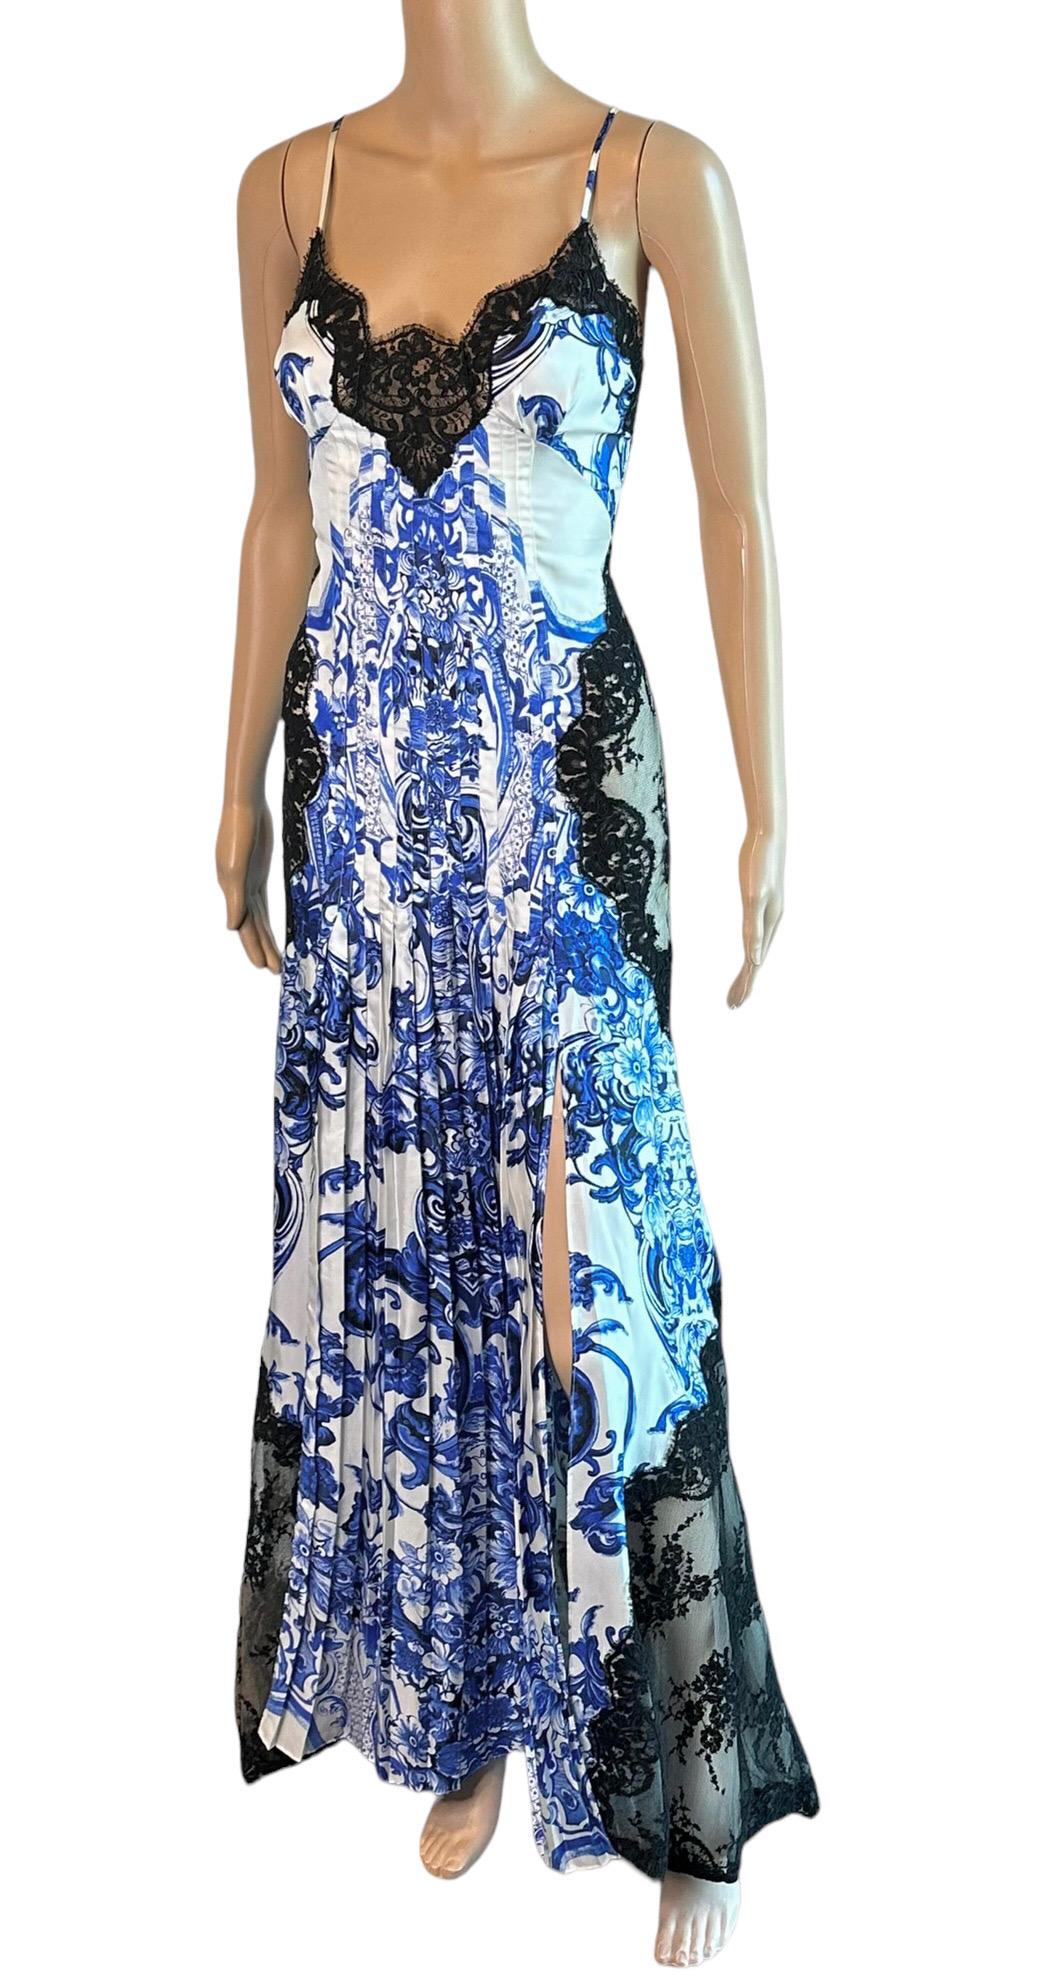 Roberto Cavalli Resort 2013 Chinoiserie Ming Porcelain Sheer Lace Evening Dress For Sale 1